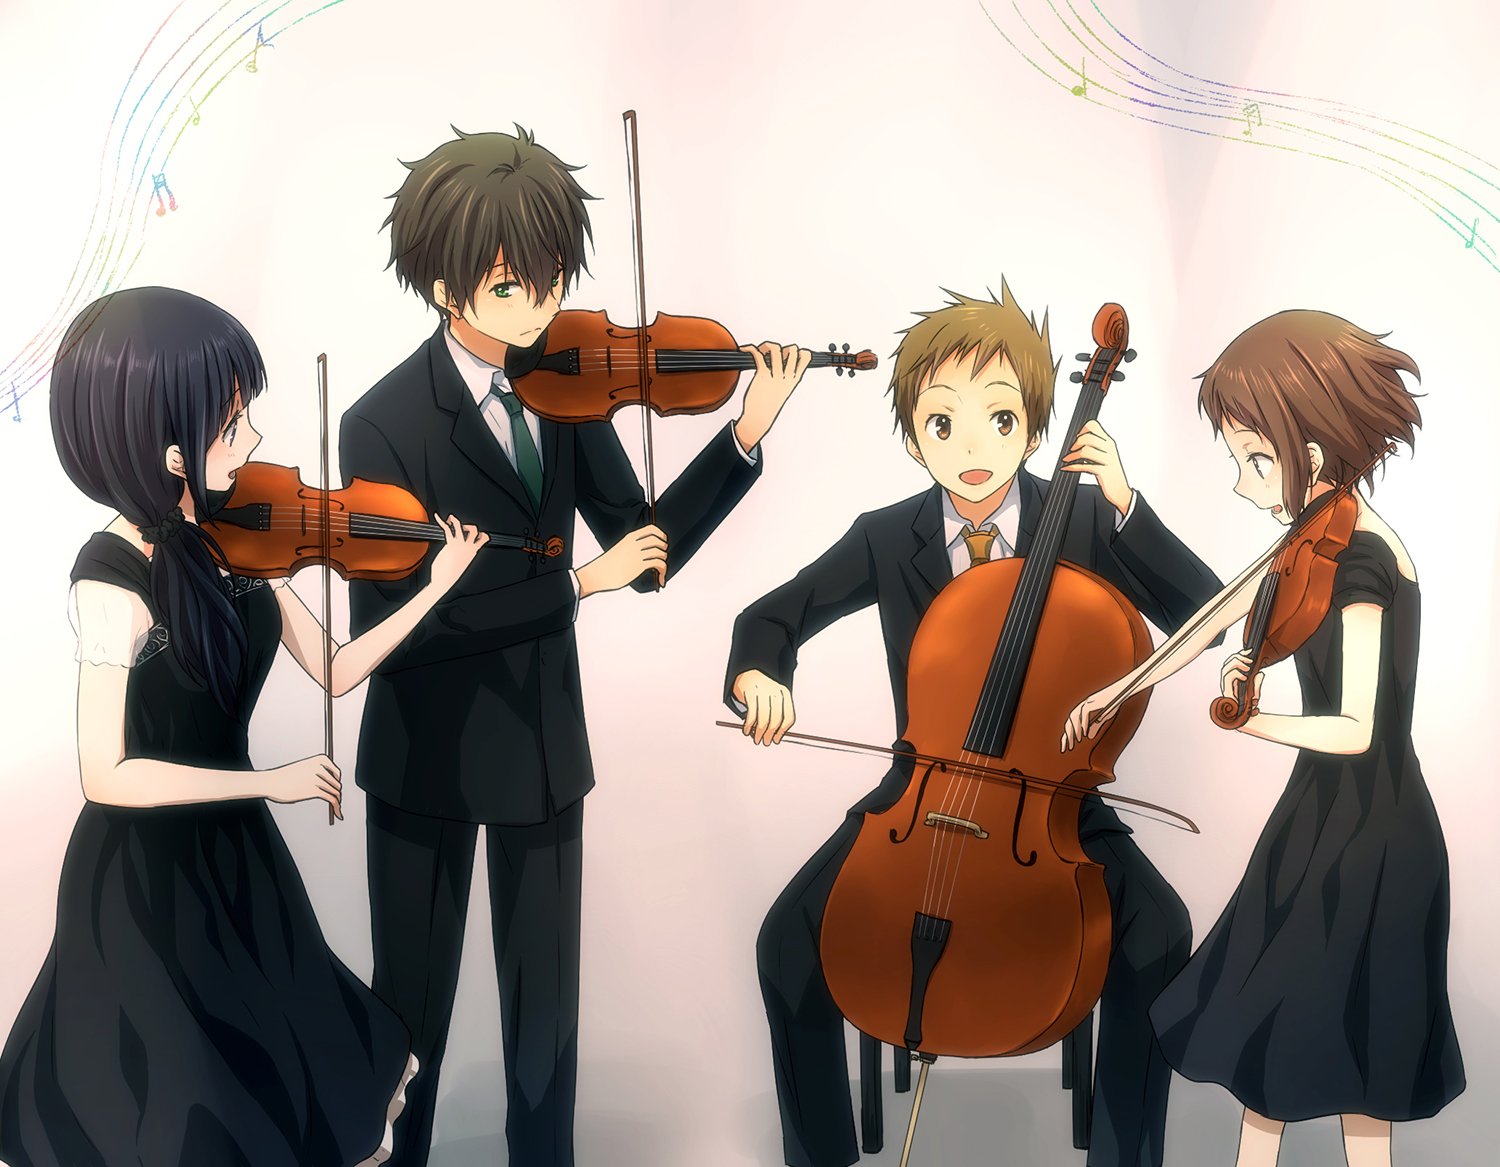 anime, Group, Violin, Black, Dress, White, Background, Music, Musical, Instruments, Series, Hyouka Wallpaper